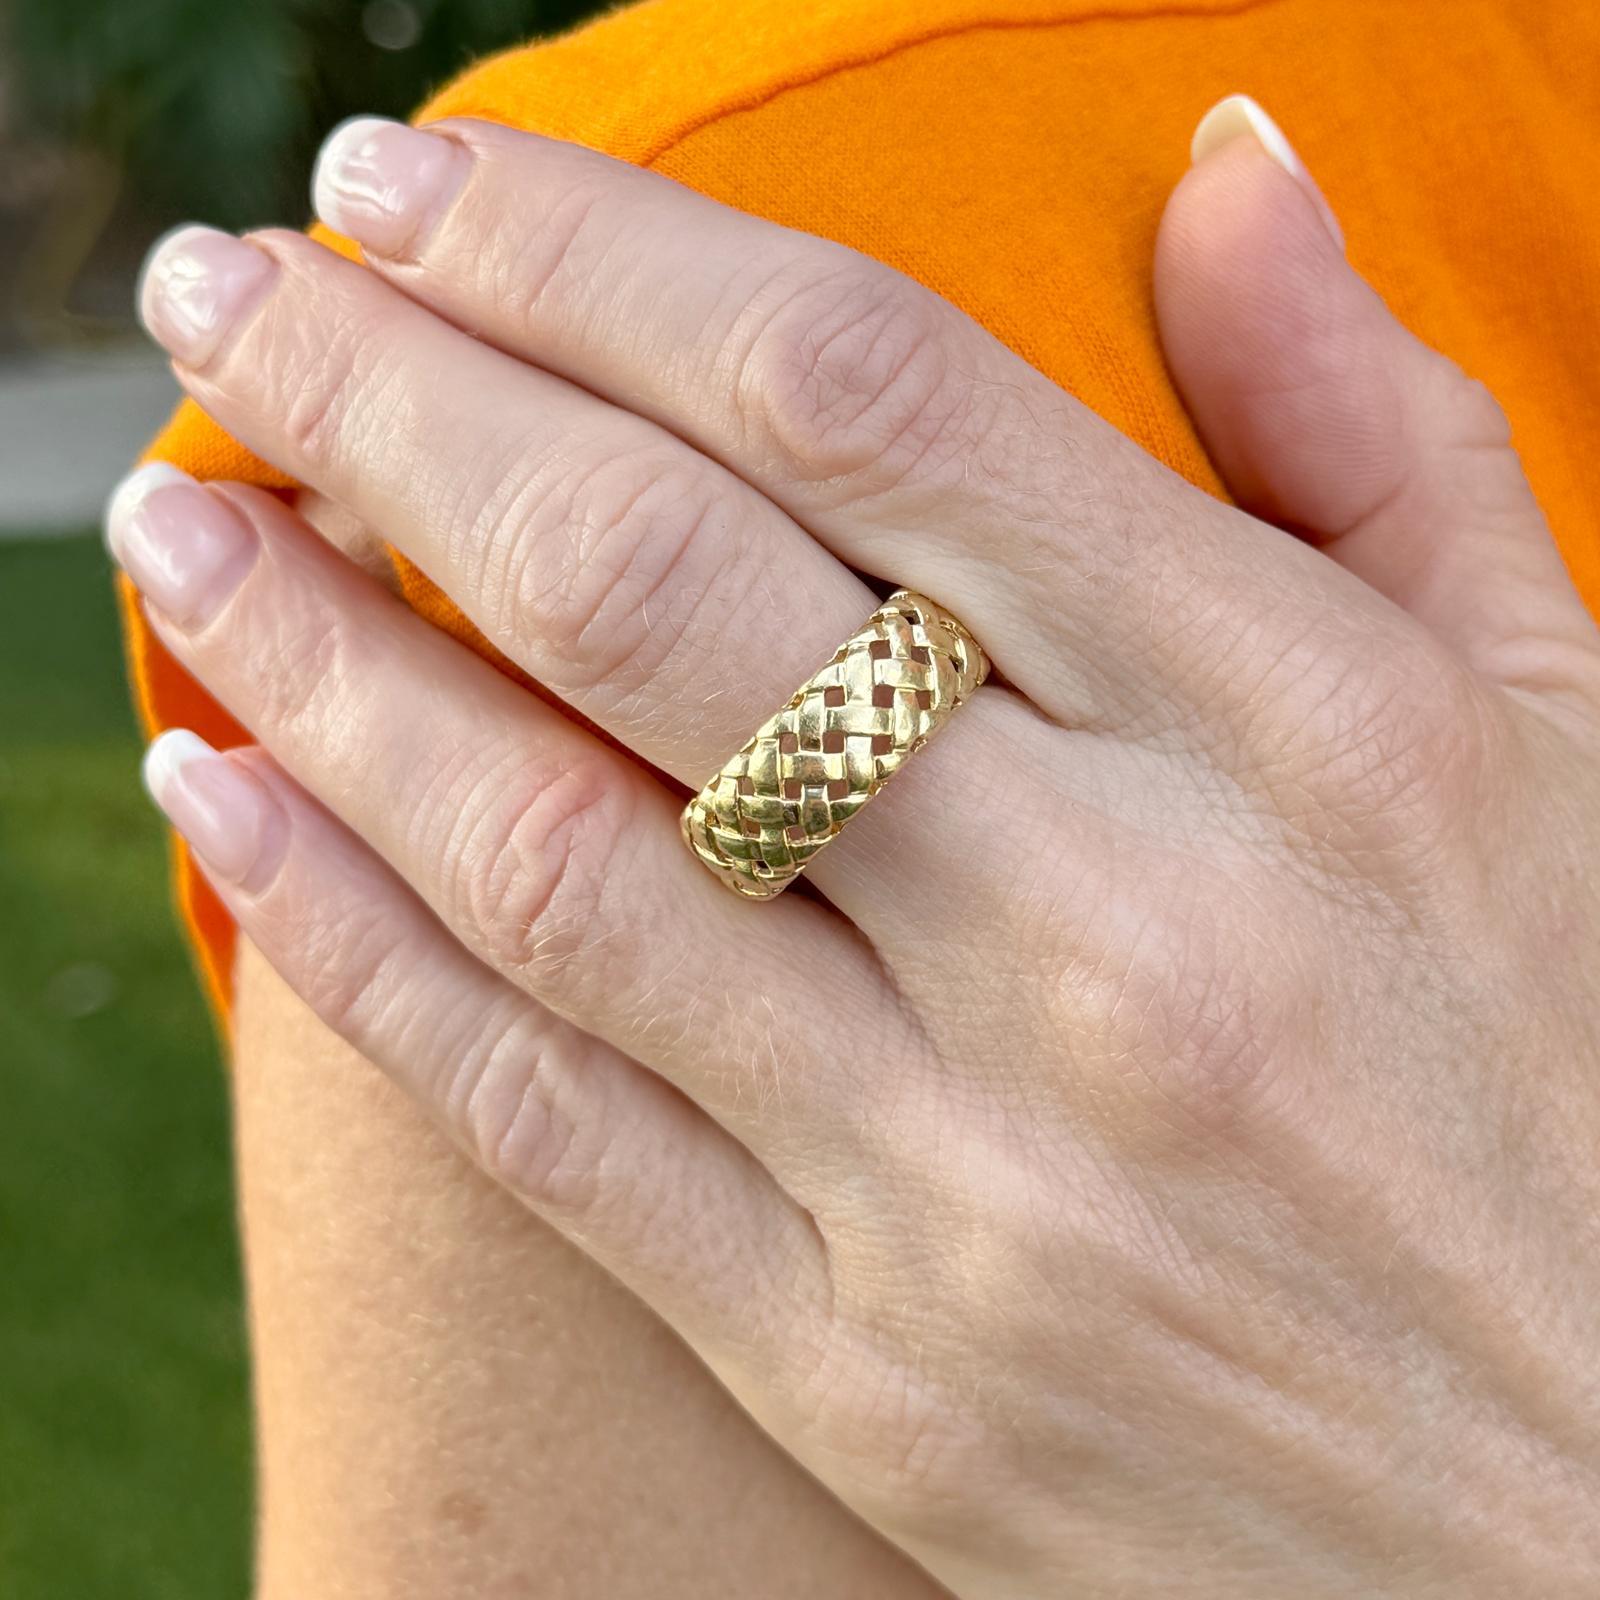 Modern 1995 Tiffany & Co. Basket Weave 18 Karat Yellow Gold Band Ring, Size 8 For Sale